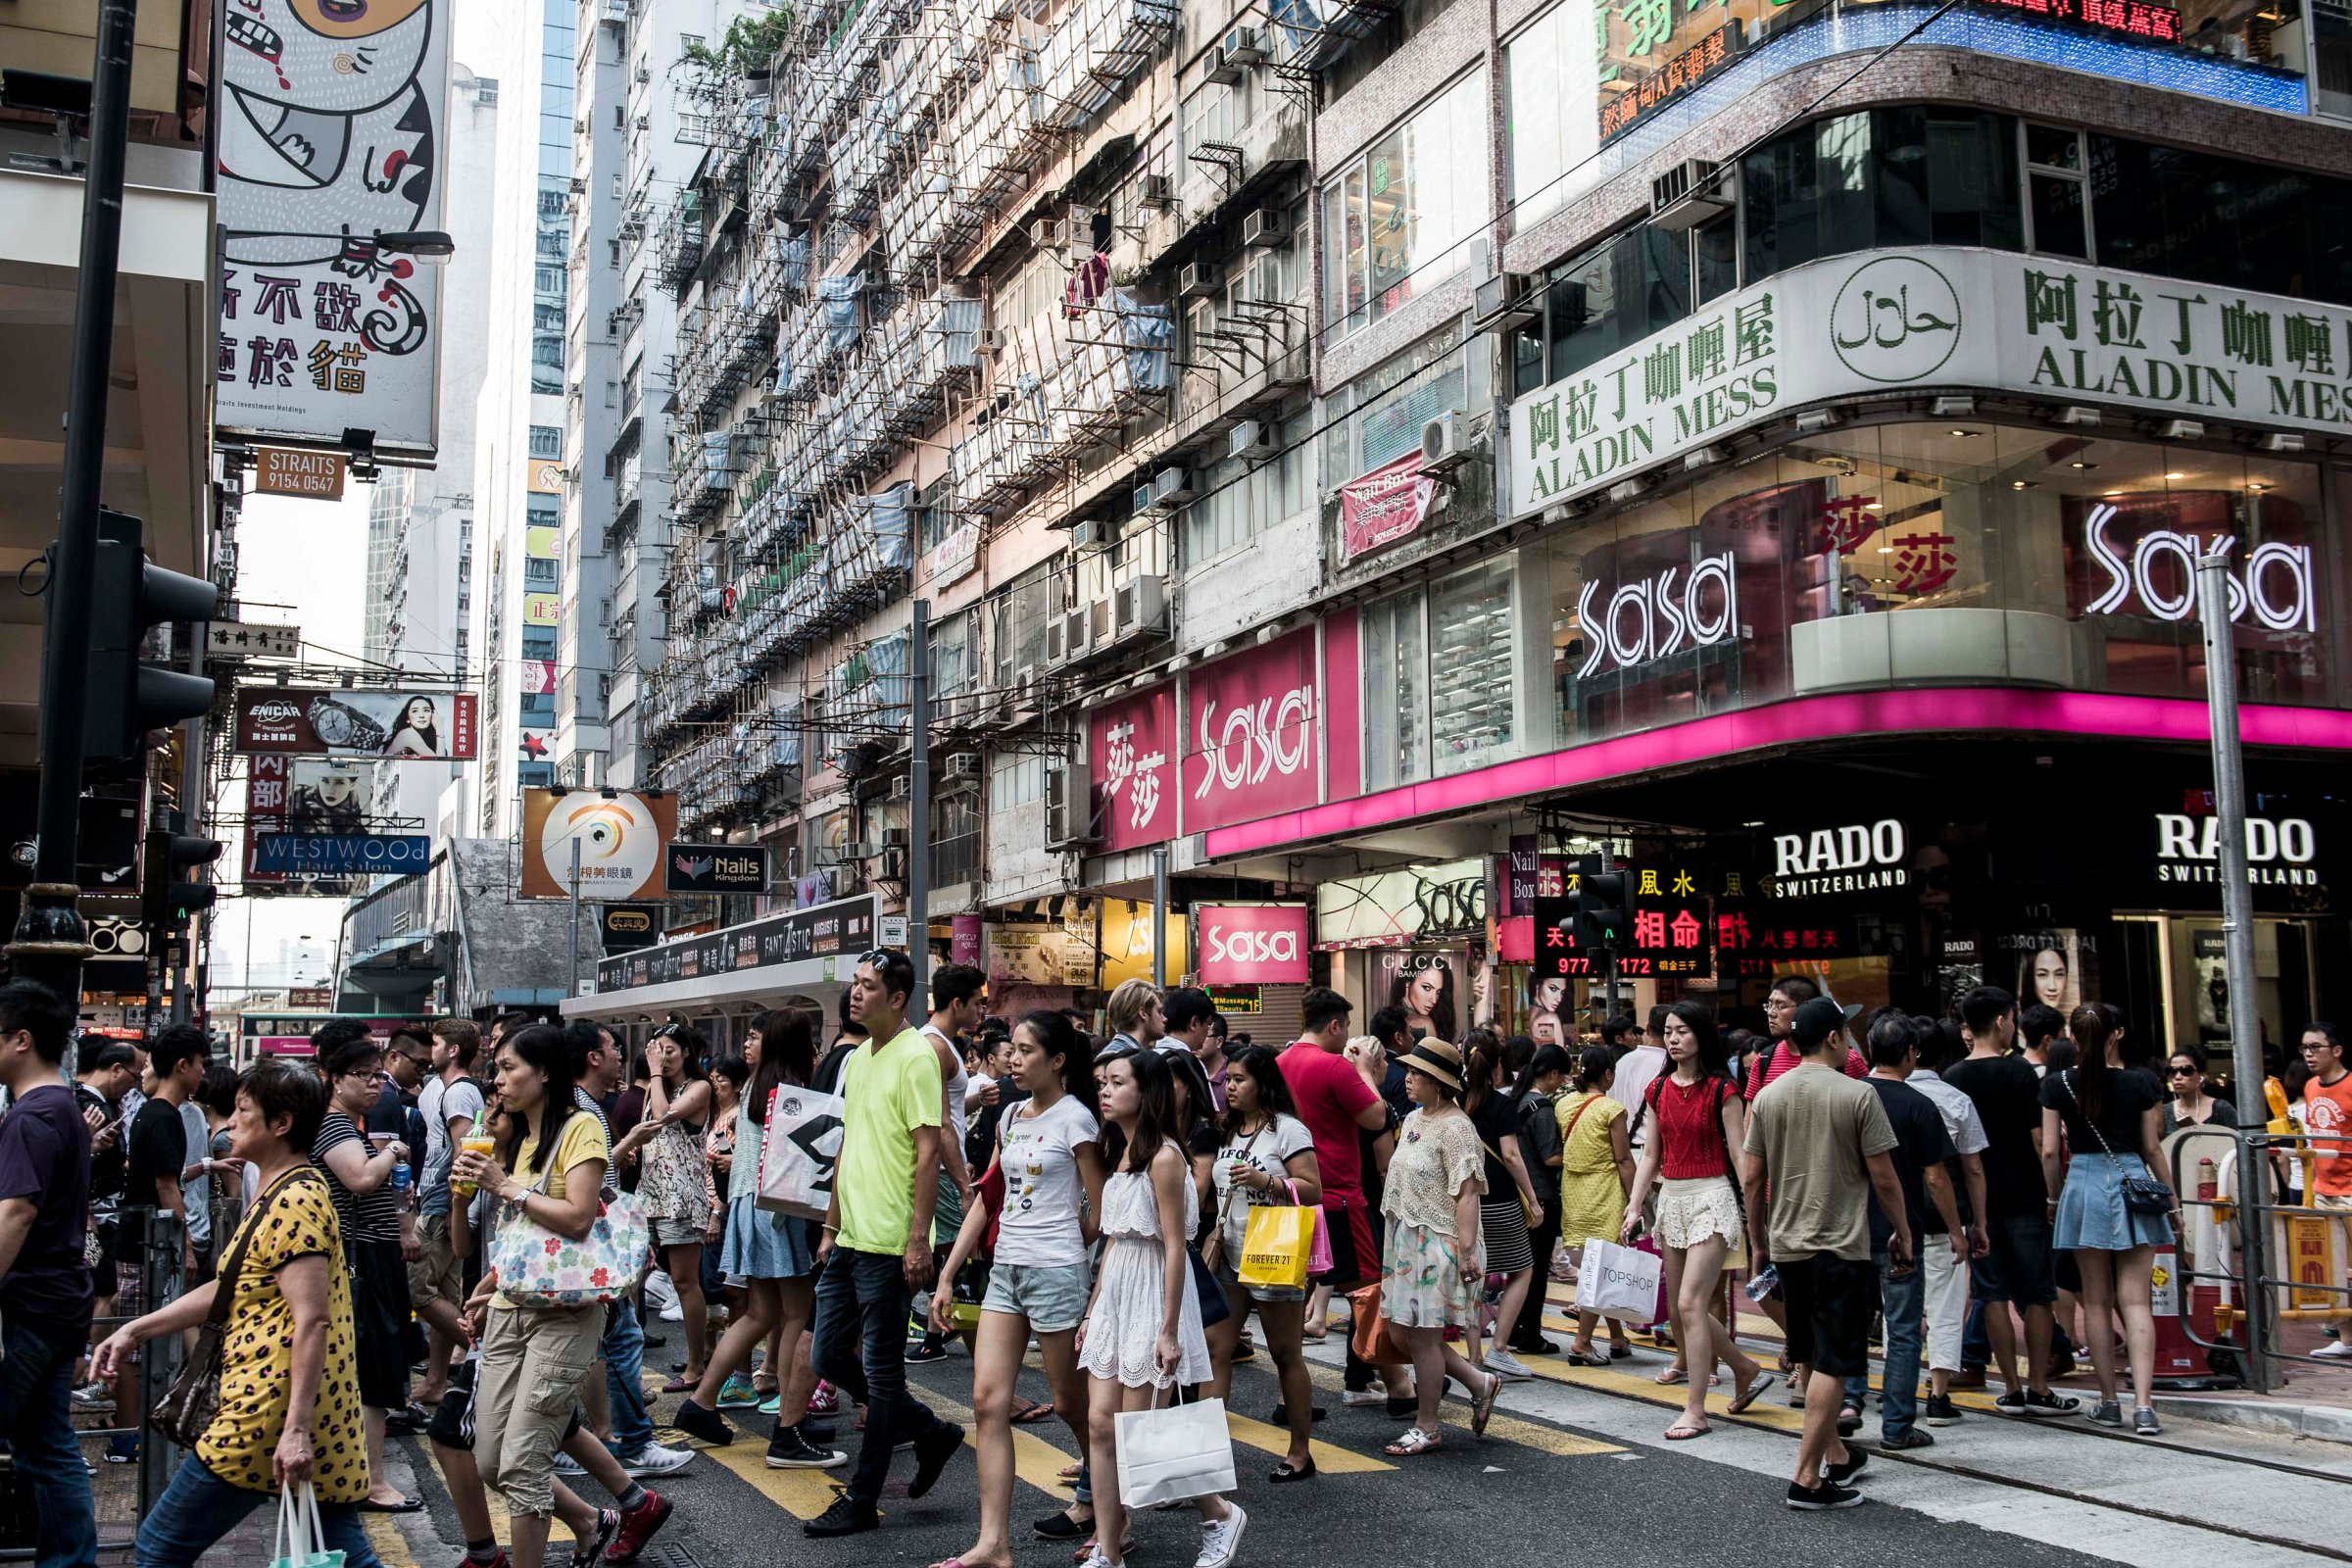 Shoppers and pedestrians cross a road on Russell Street in the Causeway Bay shopping district of Hong Kong, China, on Sunday, Aug. 9, 2015. Landlords on Hong Kong's Russell Street a year ago could boast the highest retail rents in the world. Now they are adjusting to a new reality. Photographer: Xaume Olleros/Bloomberg